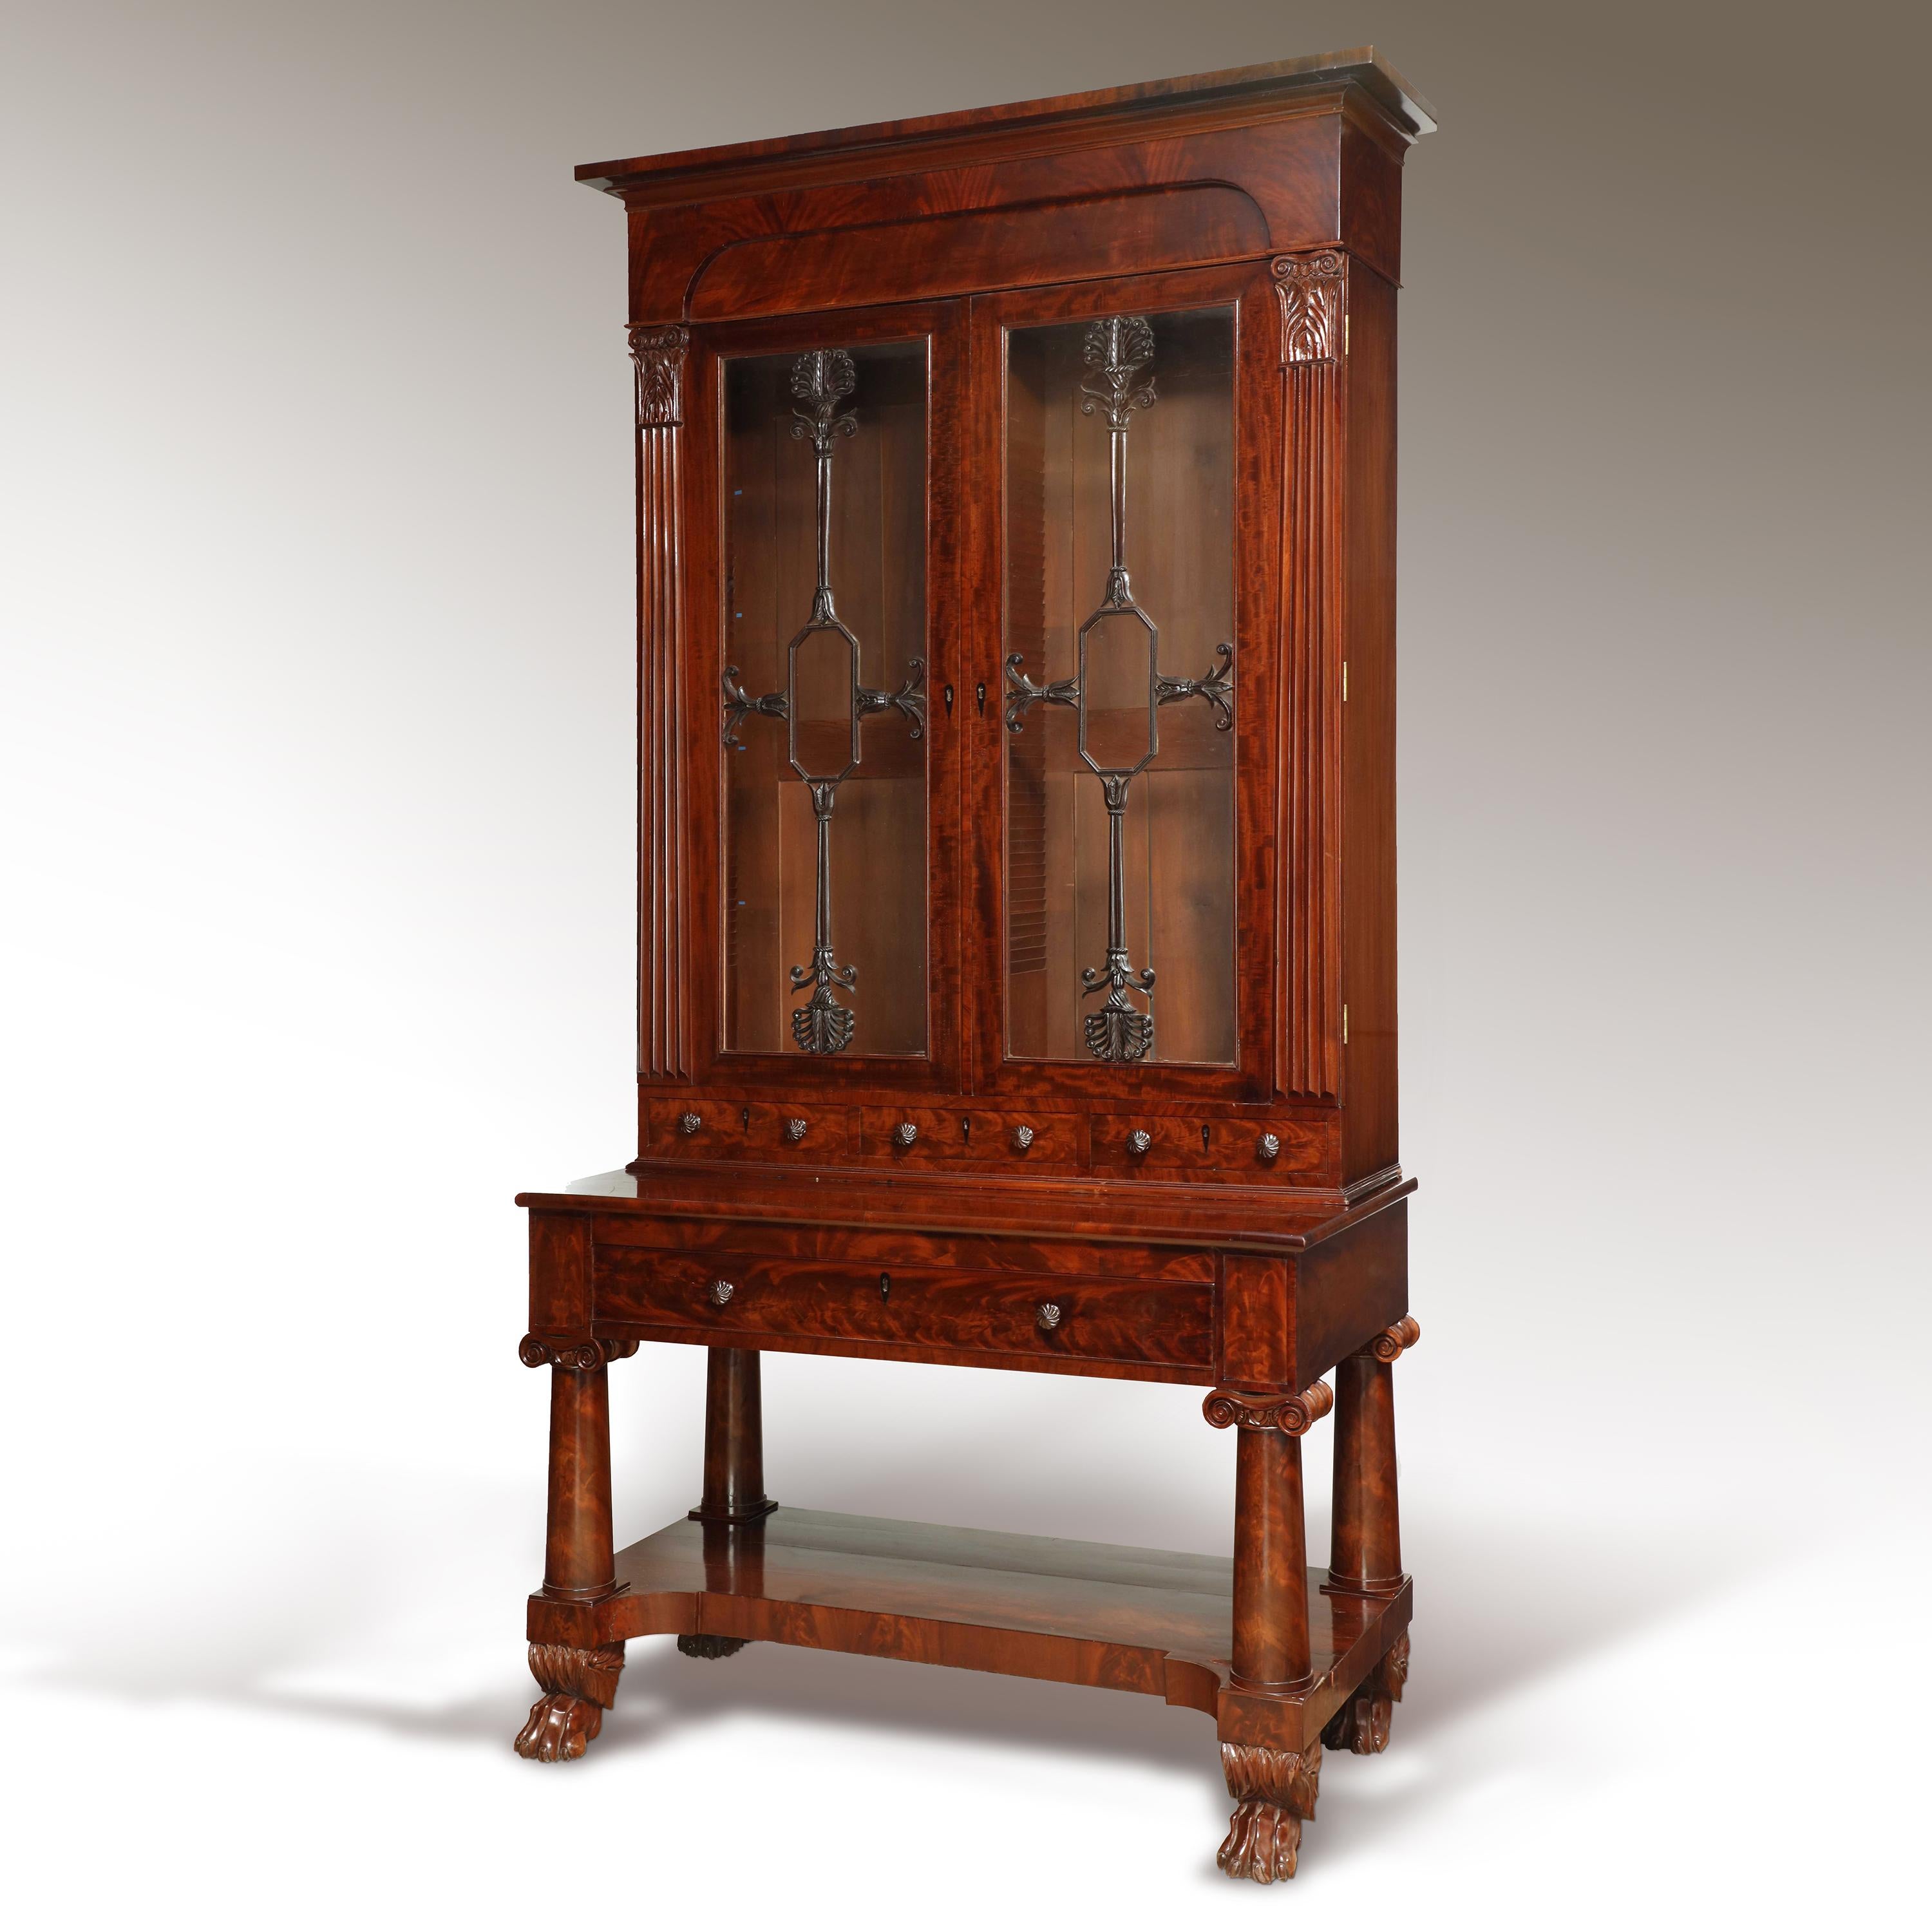 Mahogany bureau bookcase from Baltimore, Maryland of exceptional quality. Design is most like examples from shop of John Needles while tapering columnar supports and finely carved elements on doors are most closely compared to Anthony Jenkins. Circa